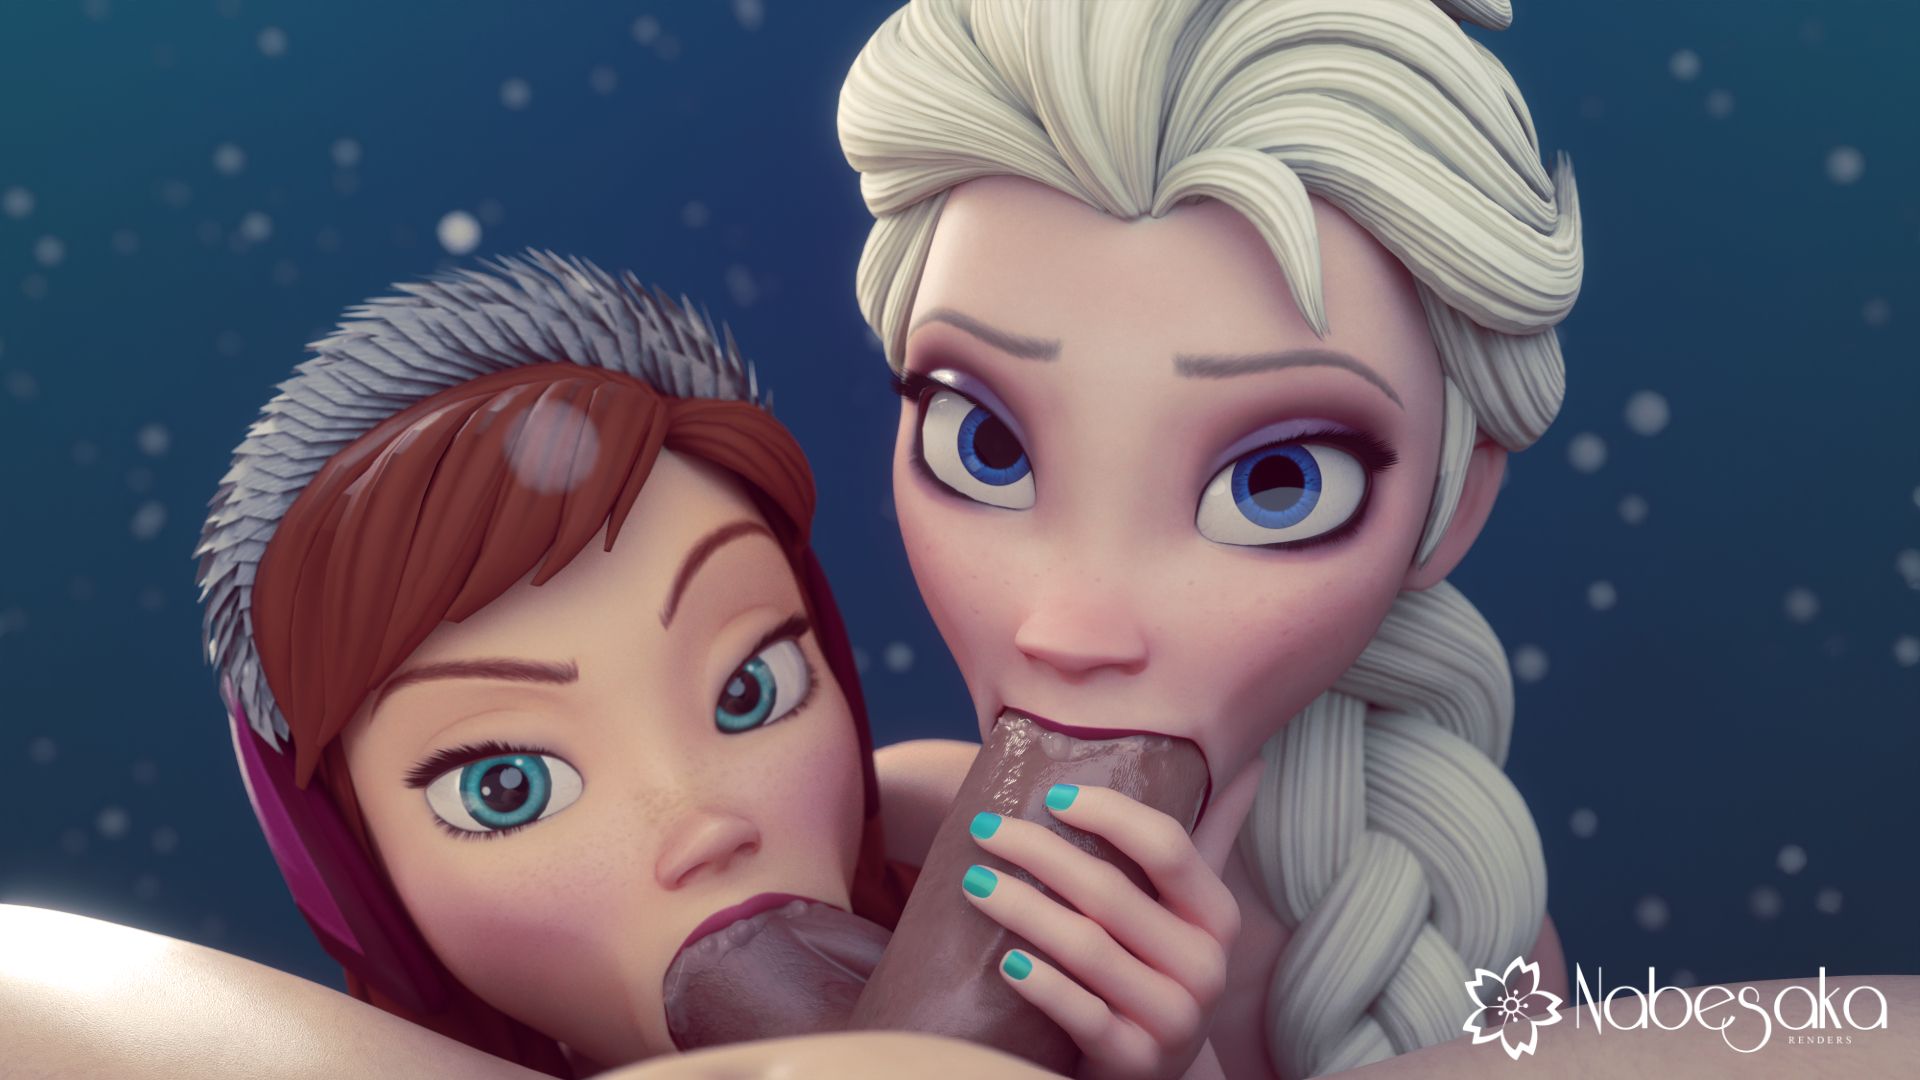 Whats the myth about frozen based on a porn star